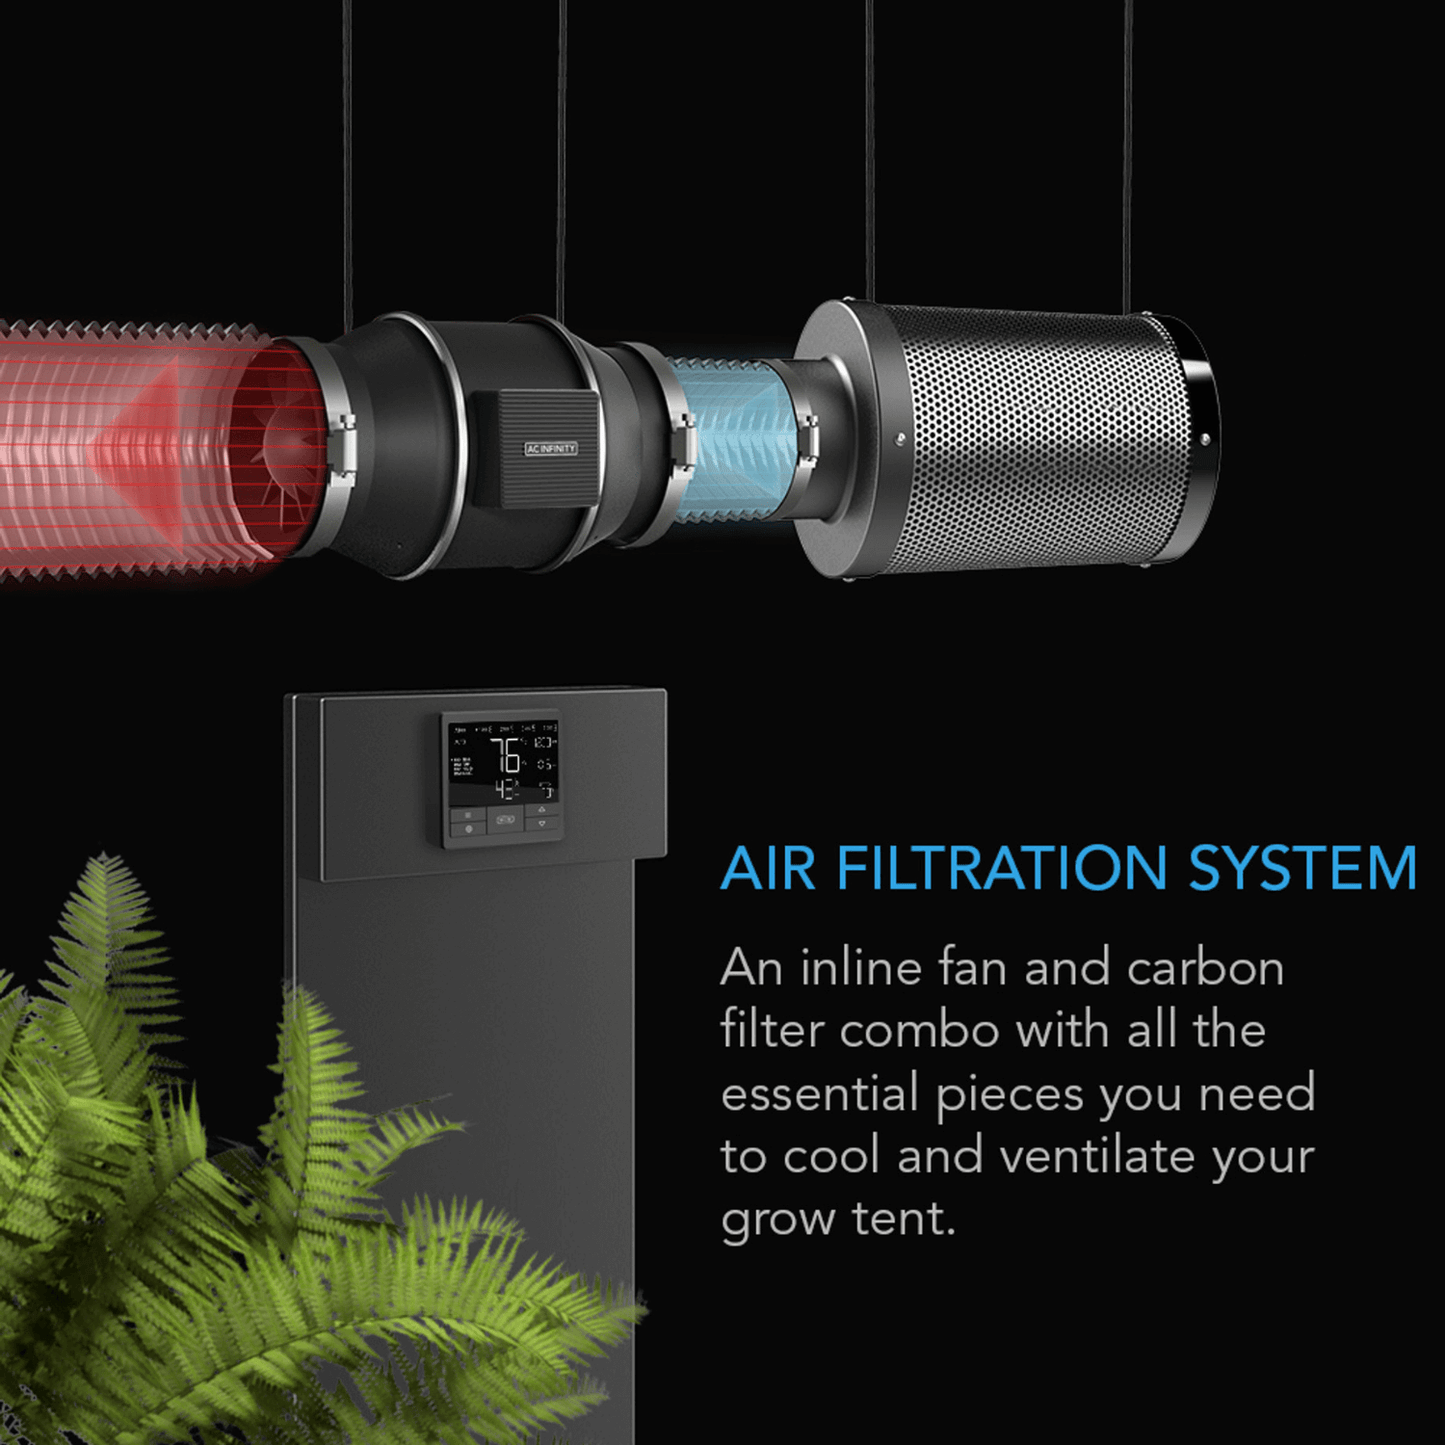 AC Infinity Air Filtration Kit PRO 4", Inline Fan with Smart Controller, Carbon Filter & Ducting Combo | AC-FKT4 | Grow Tents Depot | Climate Control | 819137022911